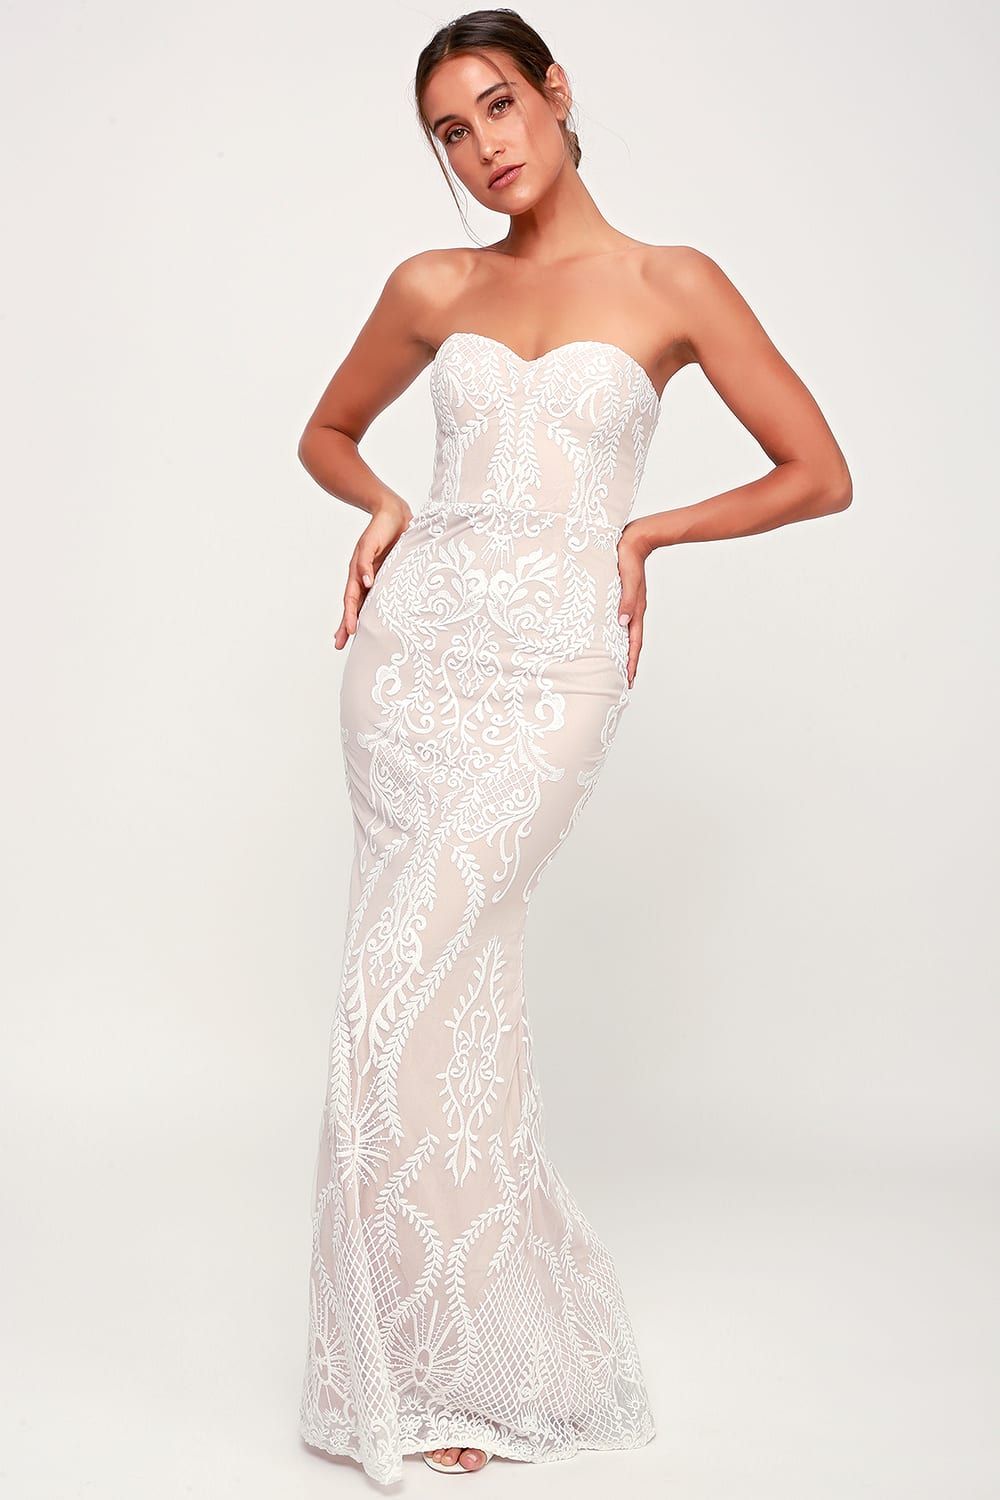 You Belong With Me White and Nude Lace Strapless Maxi Dress | Lulus (US)